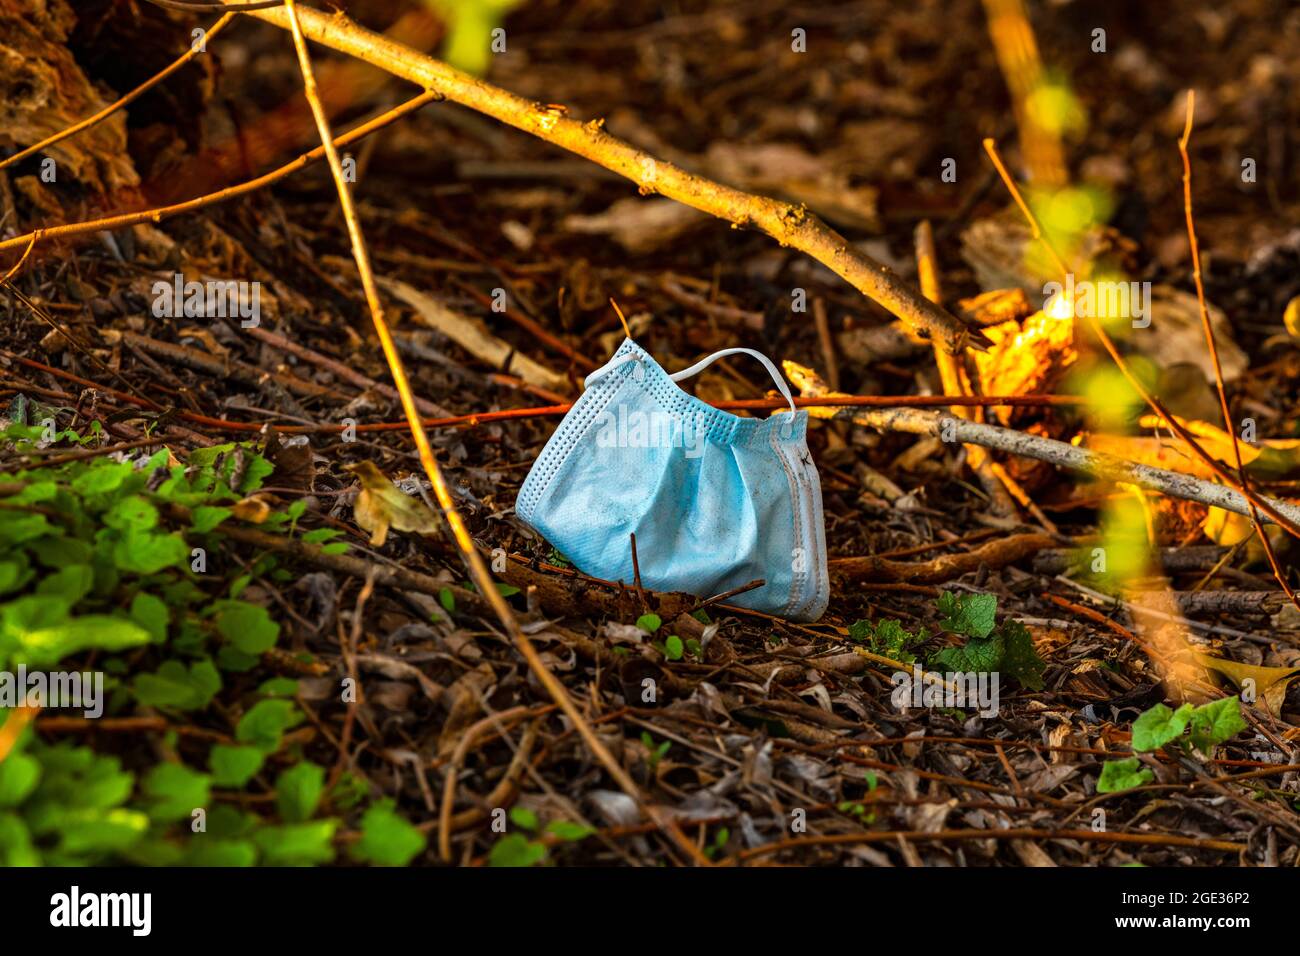 A respirator is thrown away in the forest and pollutes the environment Stock Photo